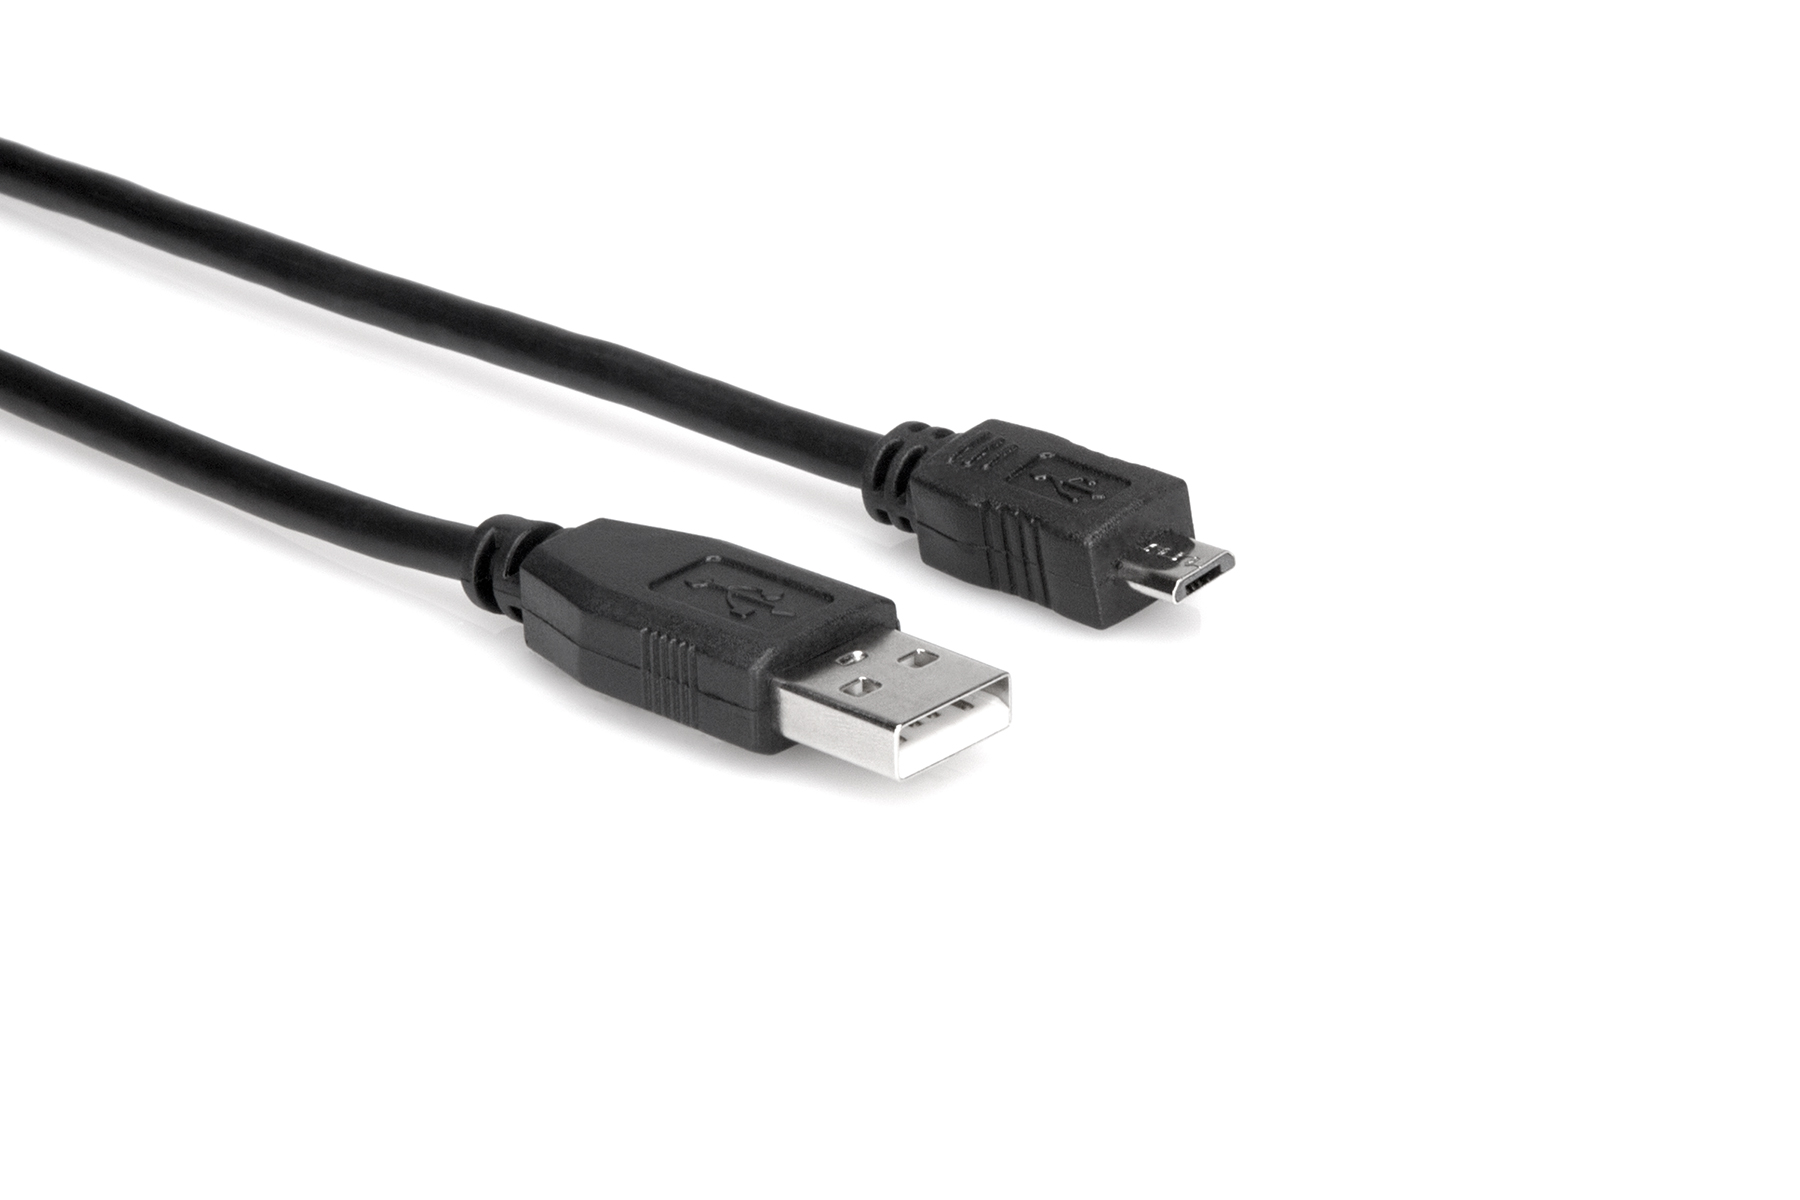 High Speed USB Cable